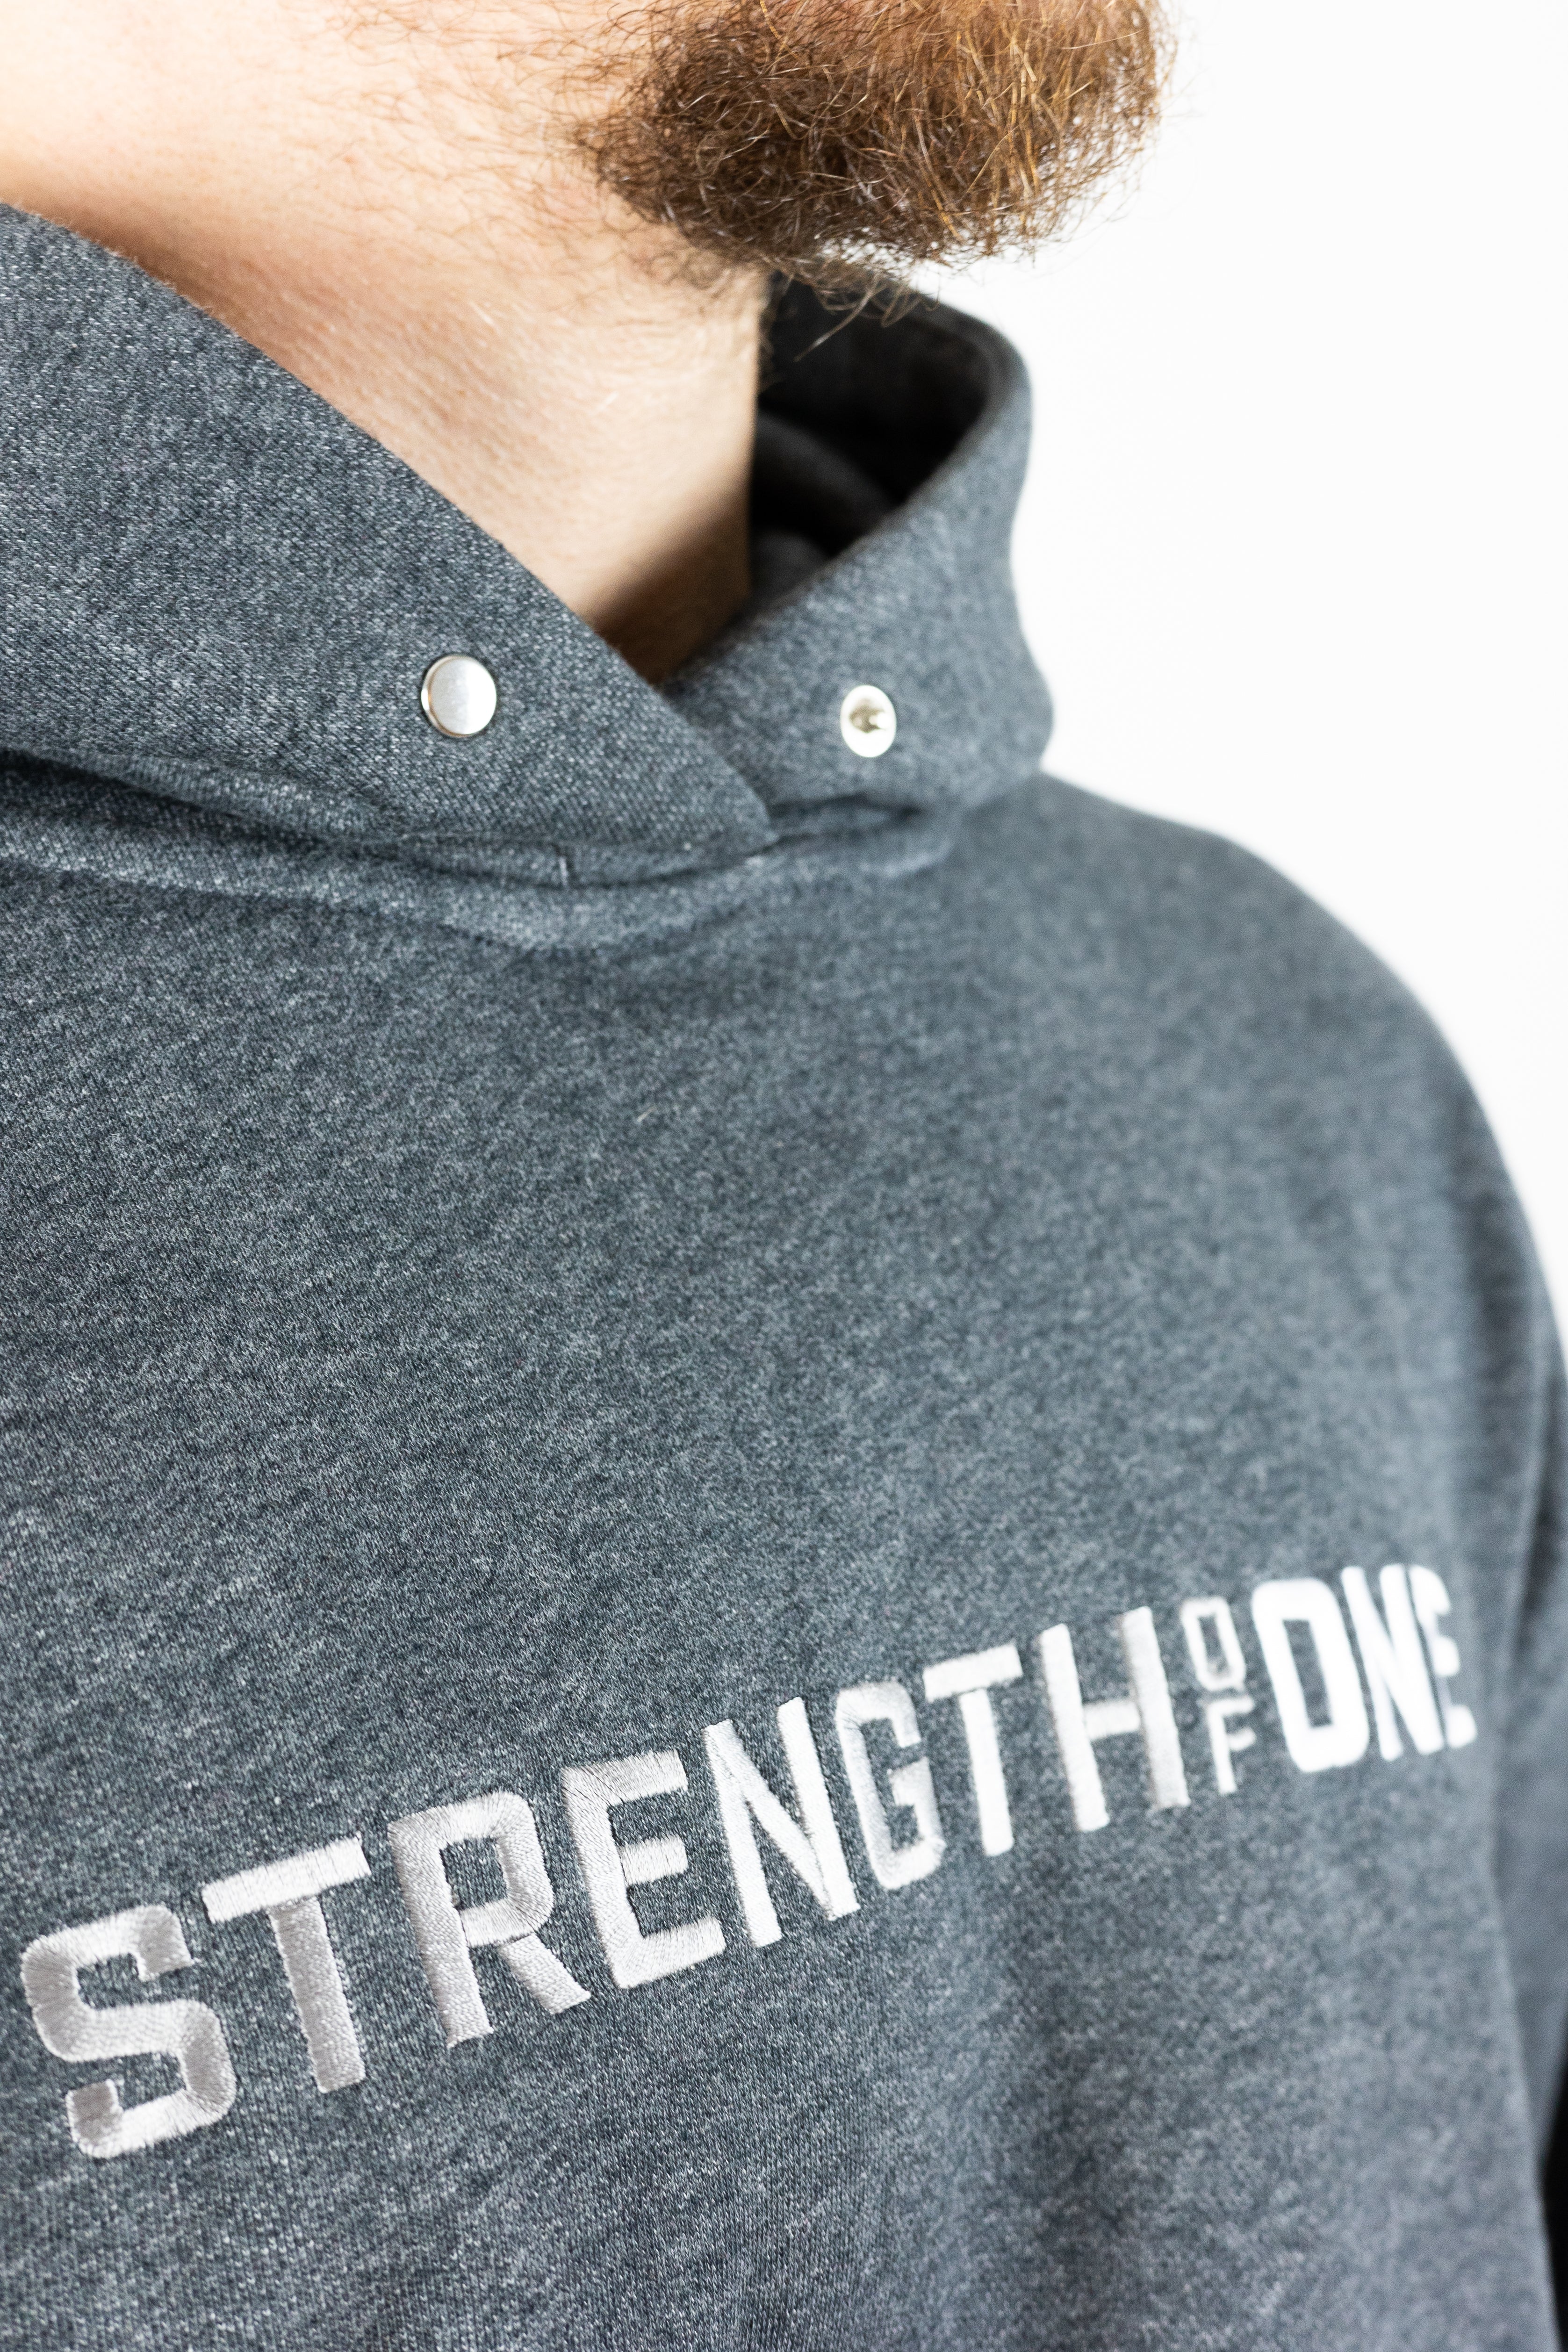 Gray hoodie with metal clasp at neck and words Strength of One embroidered on center chest